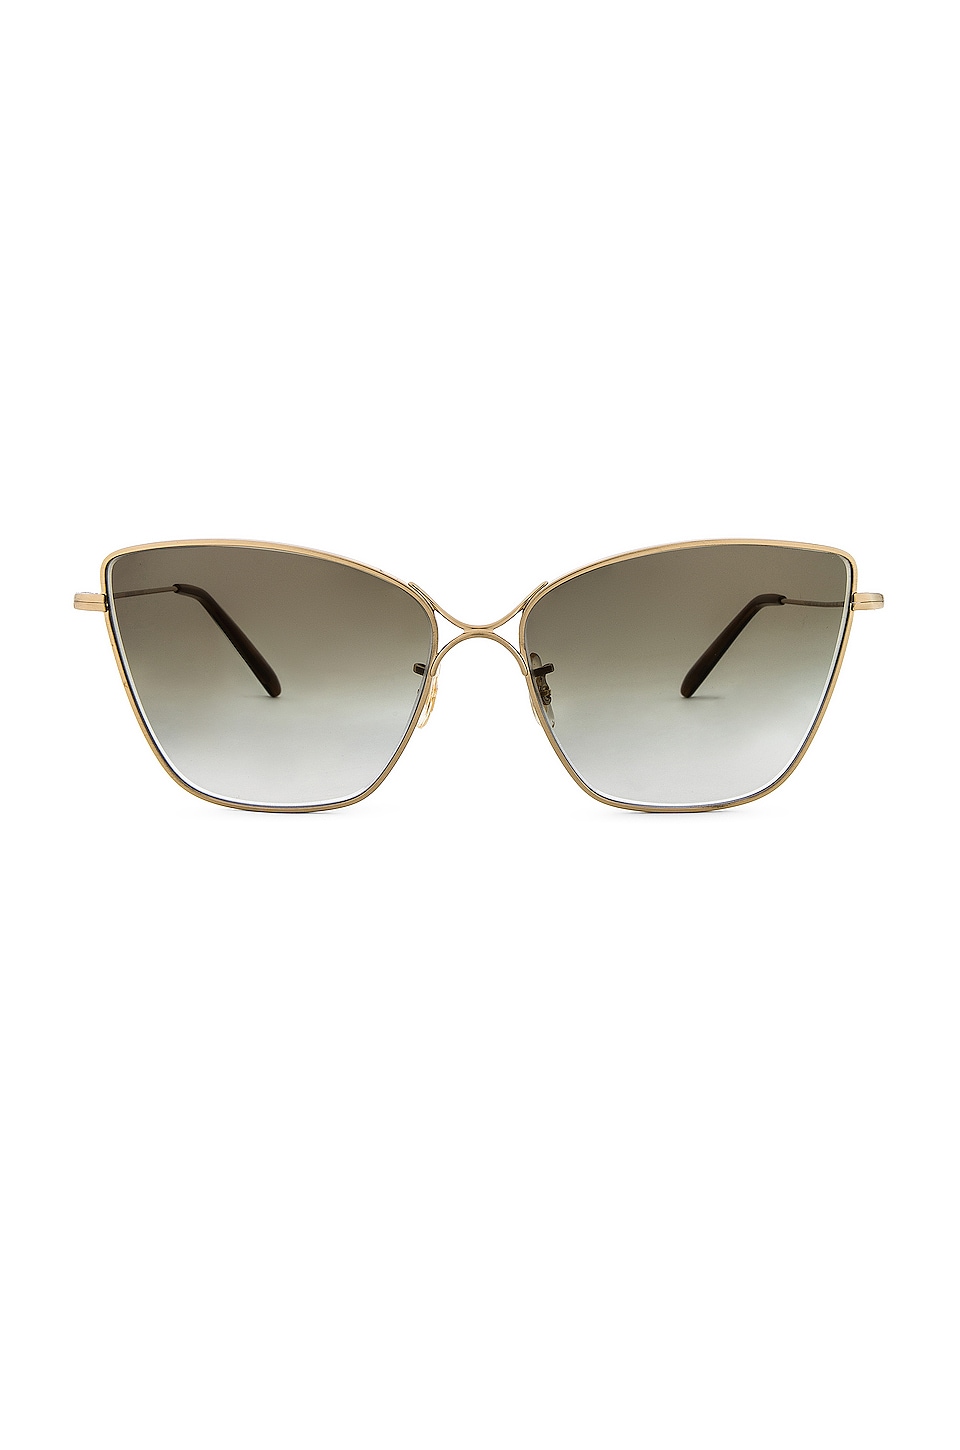 Oliver Peoples Marlyse Sunglasses in Olive | REVOLVE